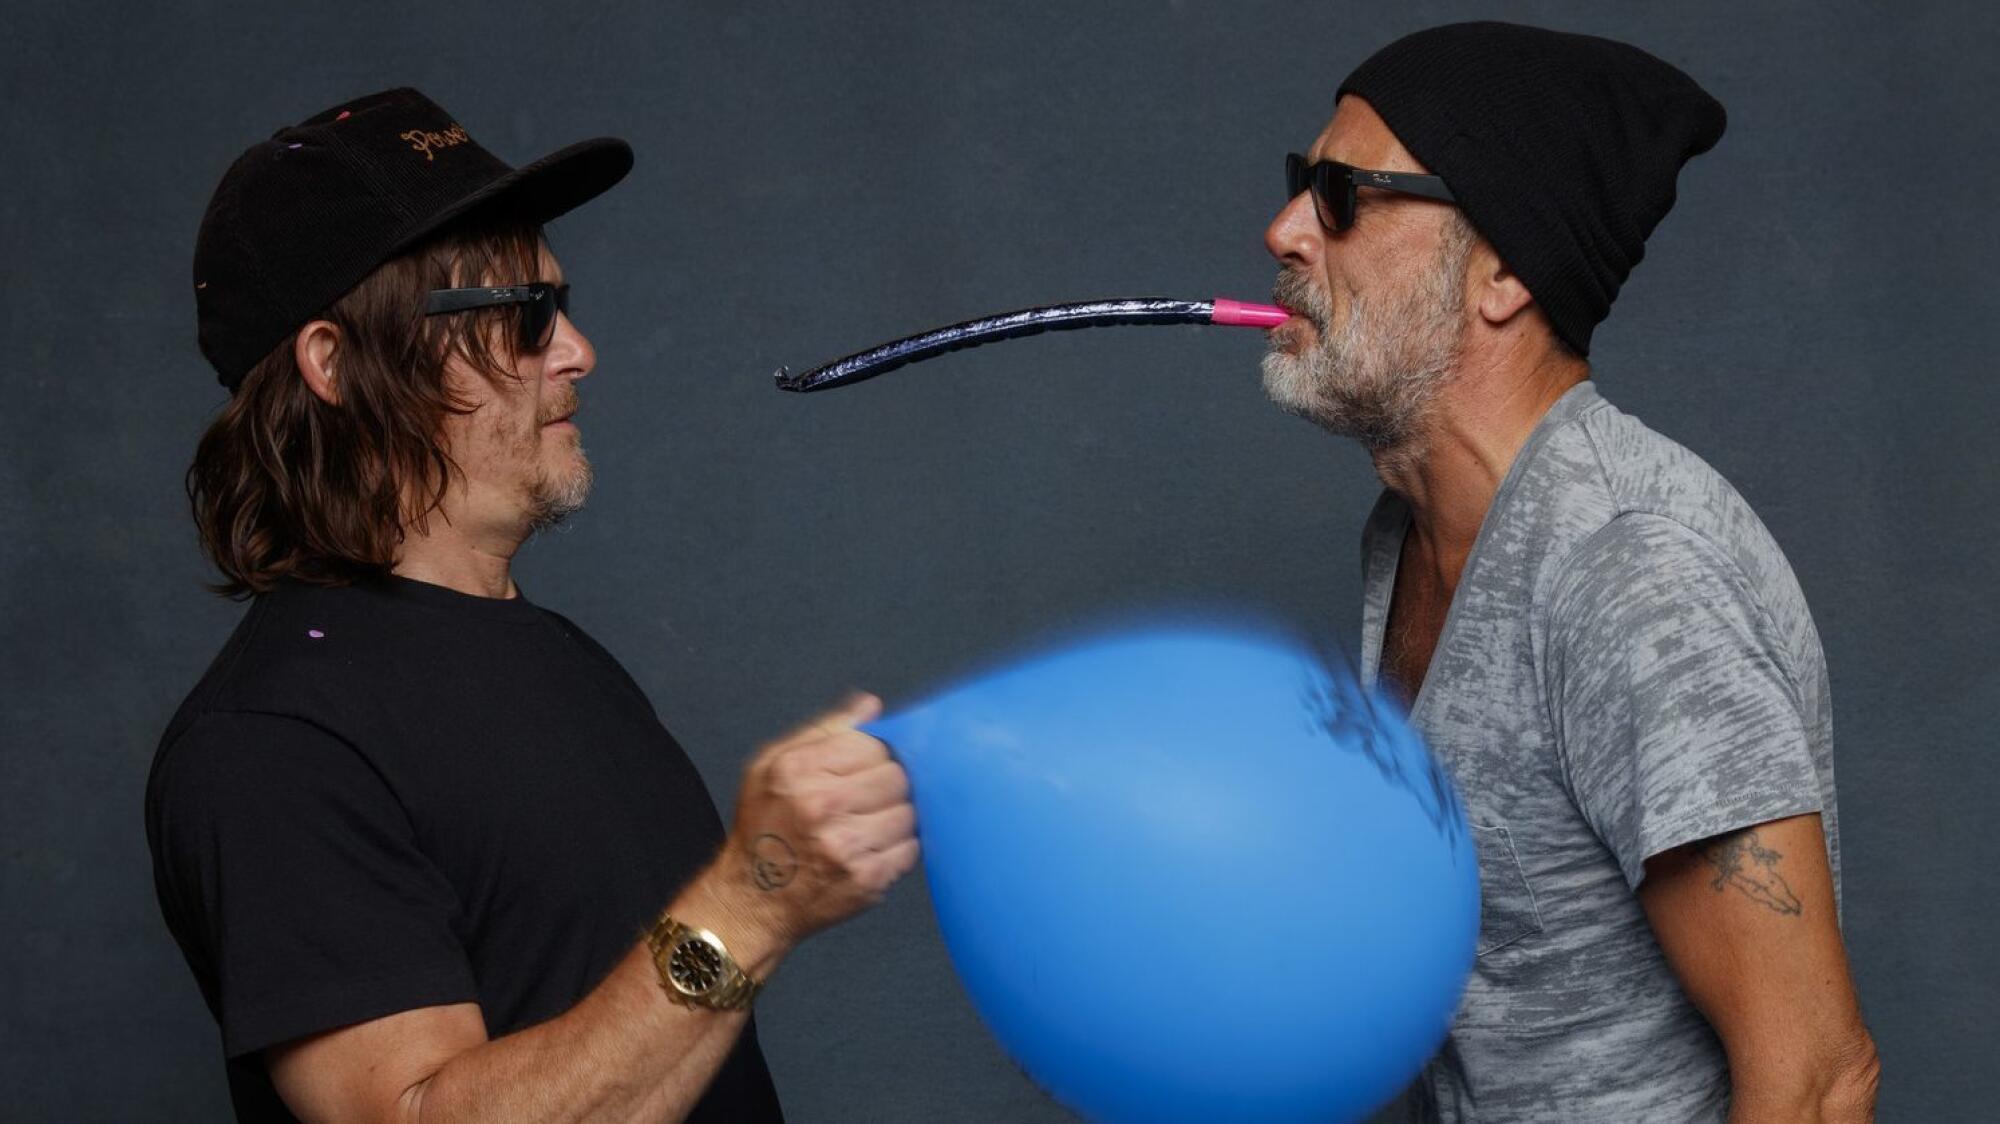 Norman Reedus and Jeffrey Dean Morgan from the television series "The Walking Dead," photographed in 2018.